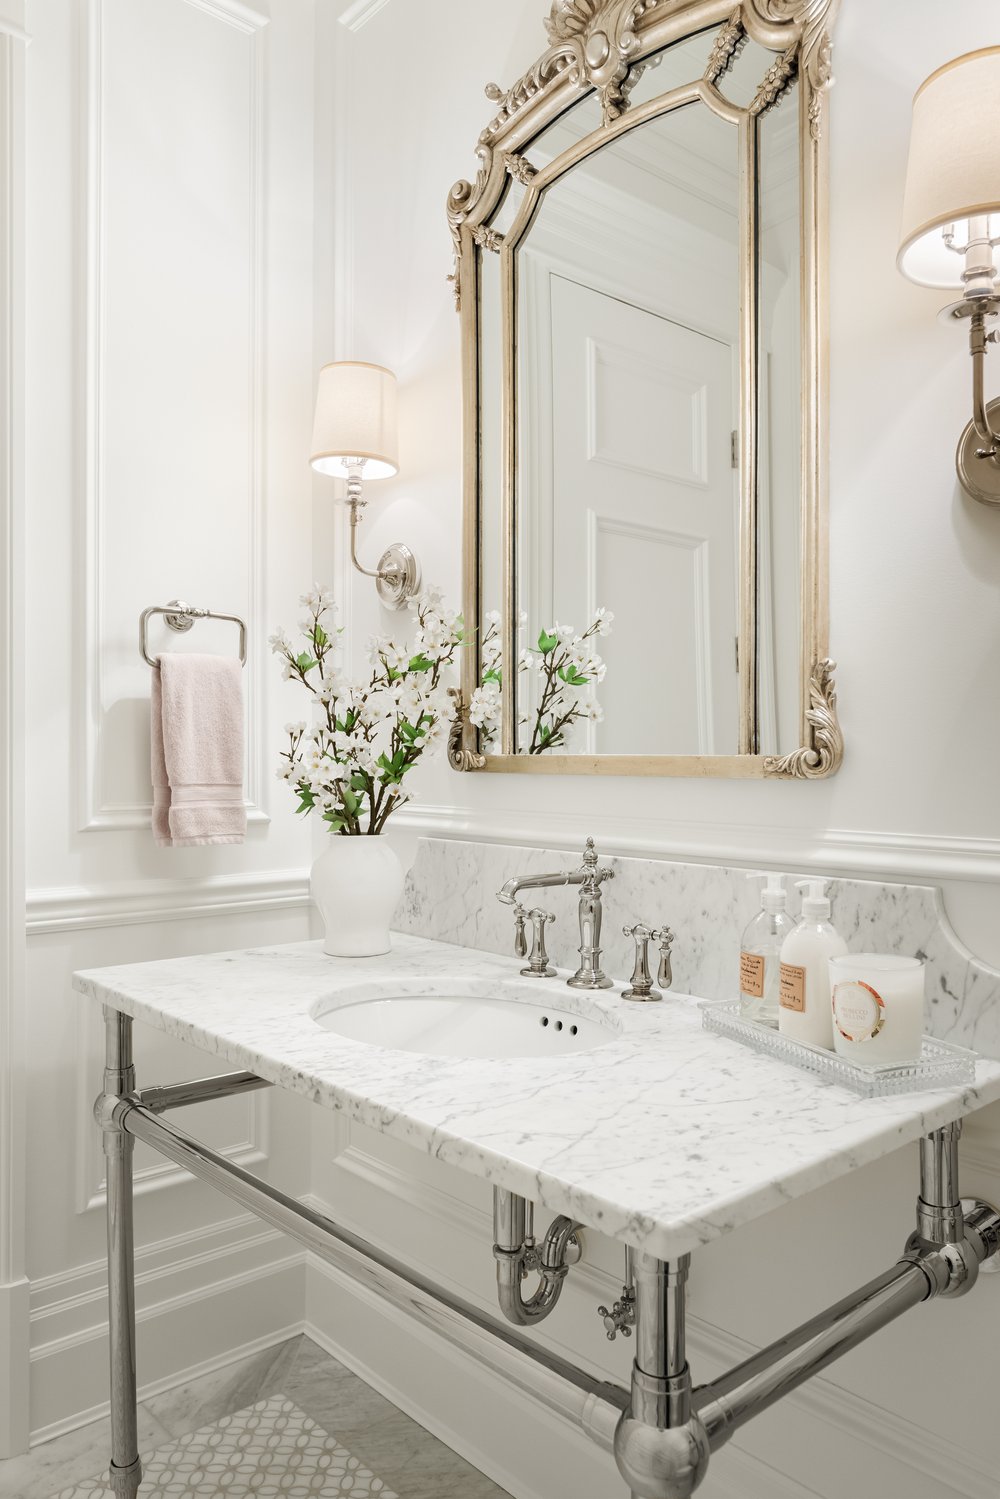 White bathroom console sink in beautiful French country home with interior design by Jenny Martin Design. #frenchcountrybath #interiordesign